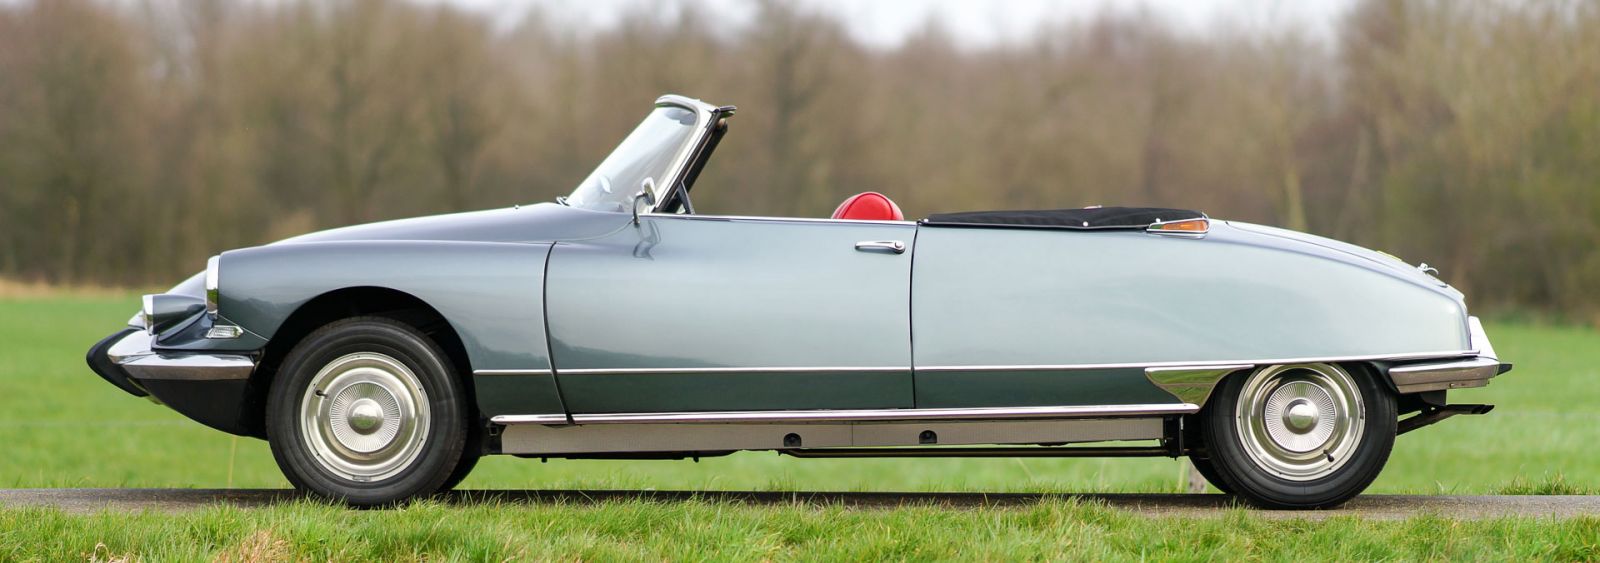 Citroën DS19 cabriolet, 1963 - Welcome to ClassiCarGarage